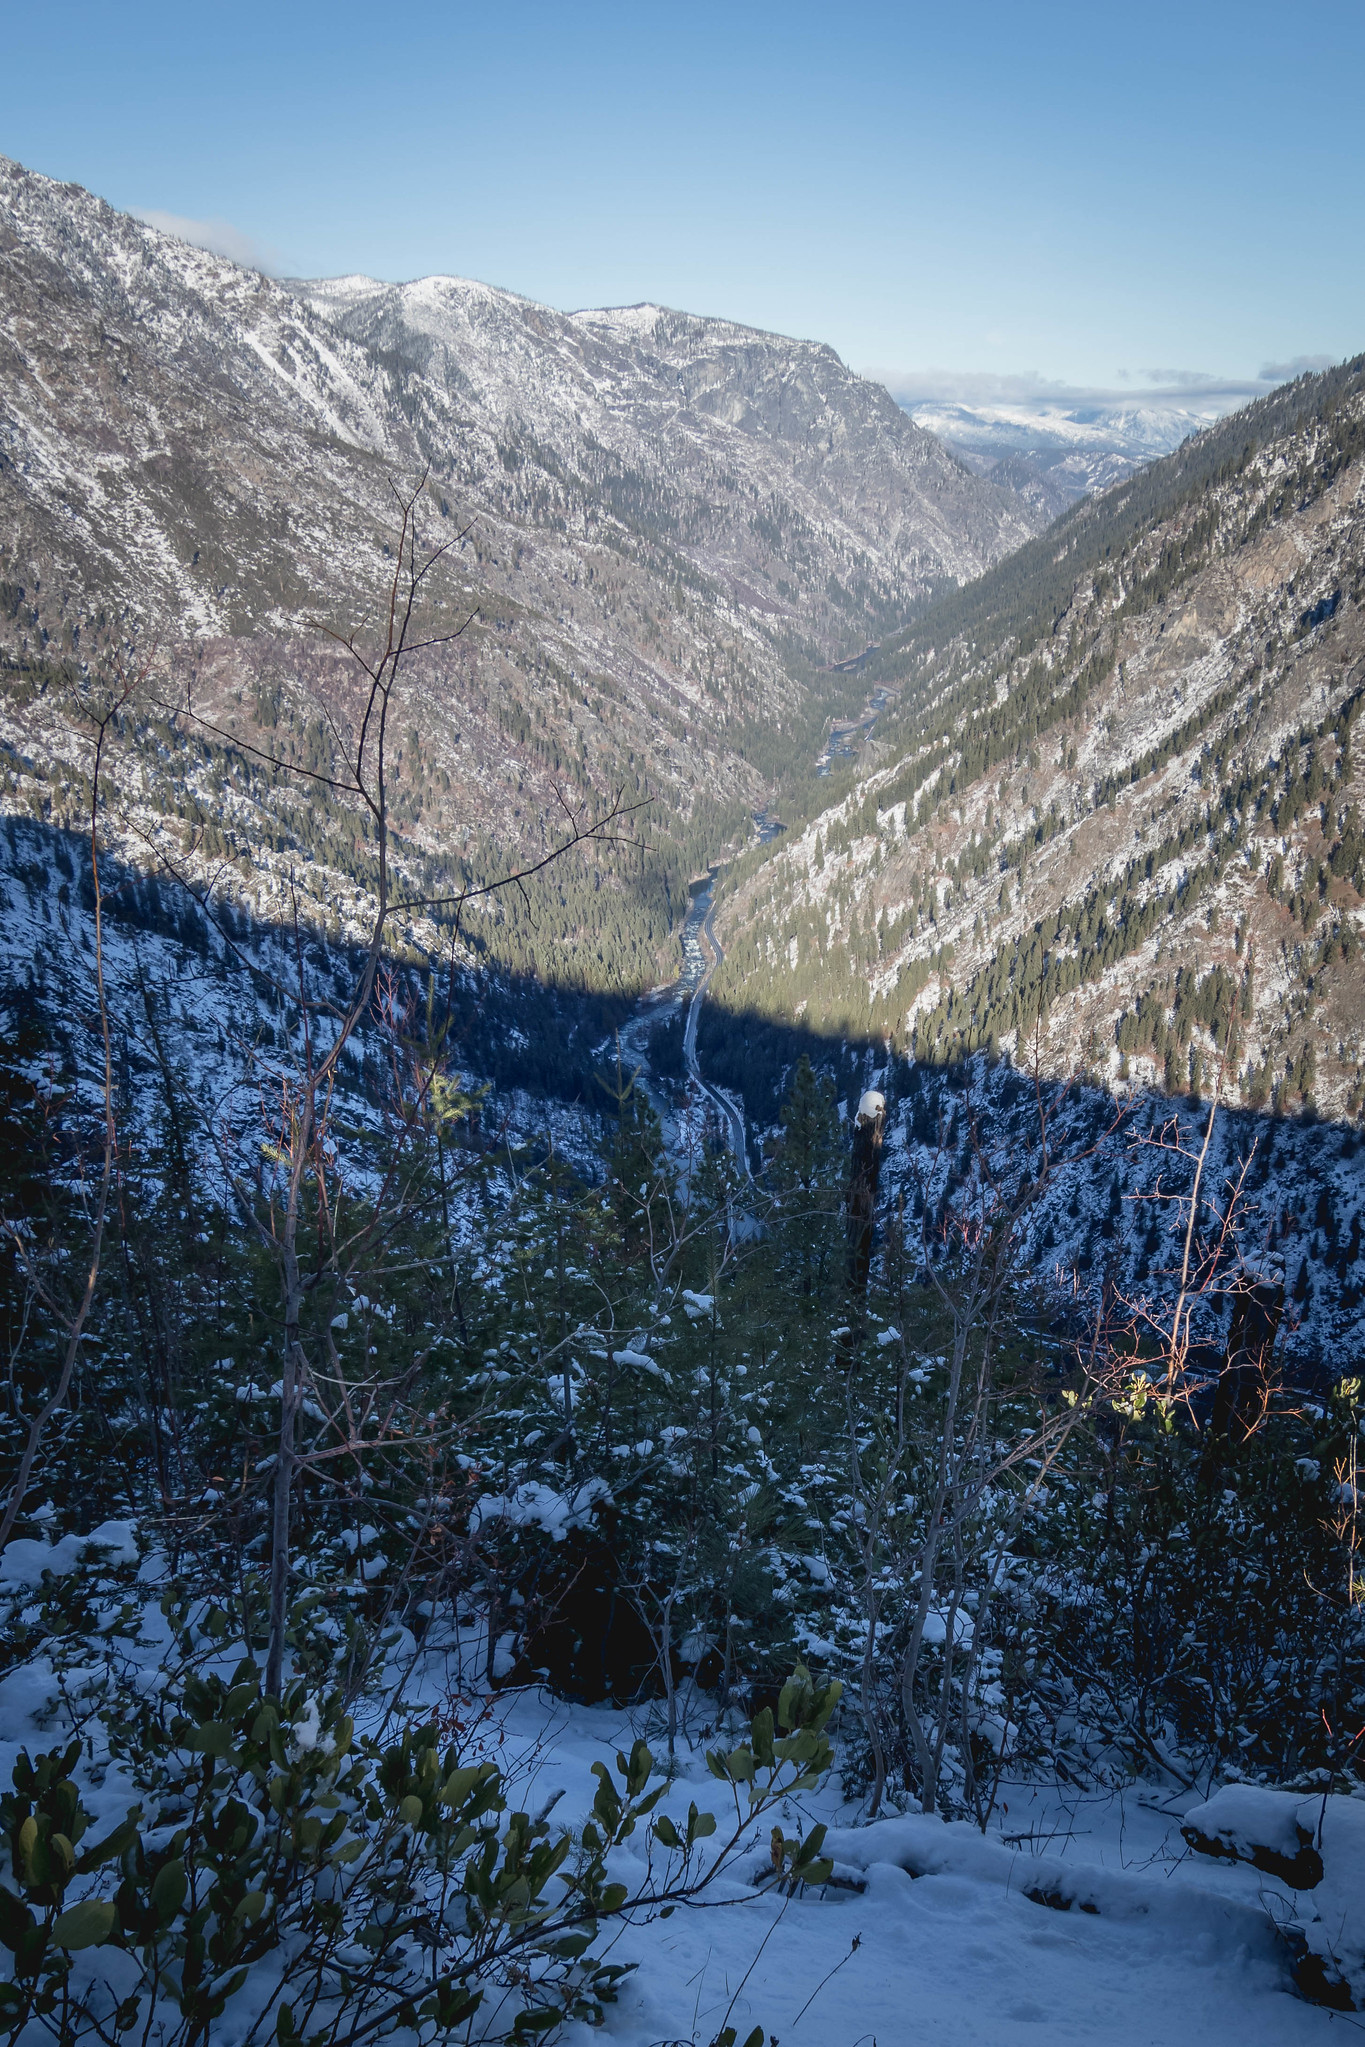 Tumwater Canyon from the saddle